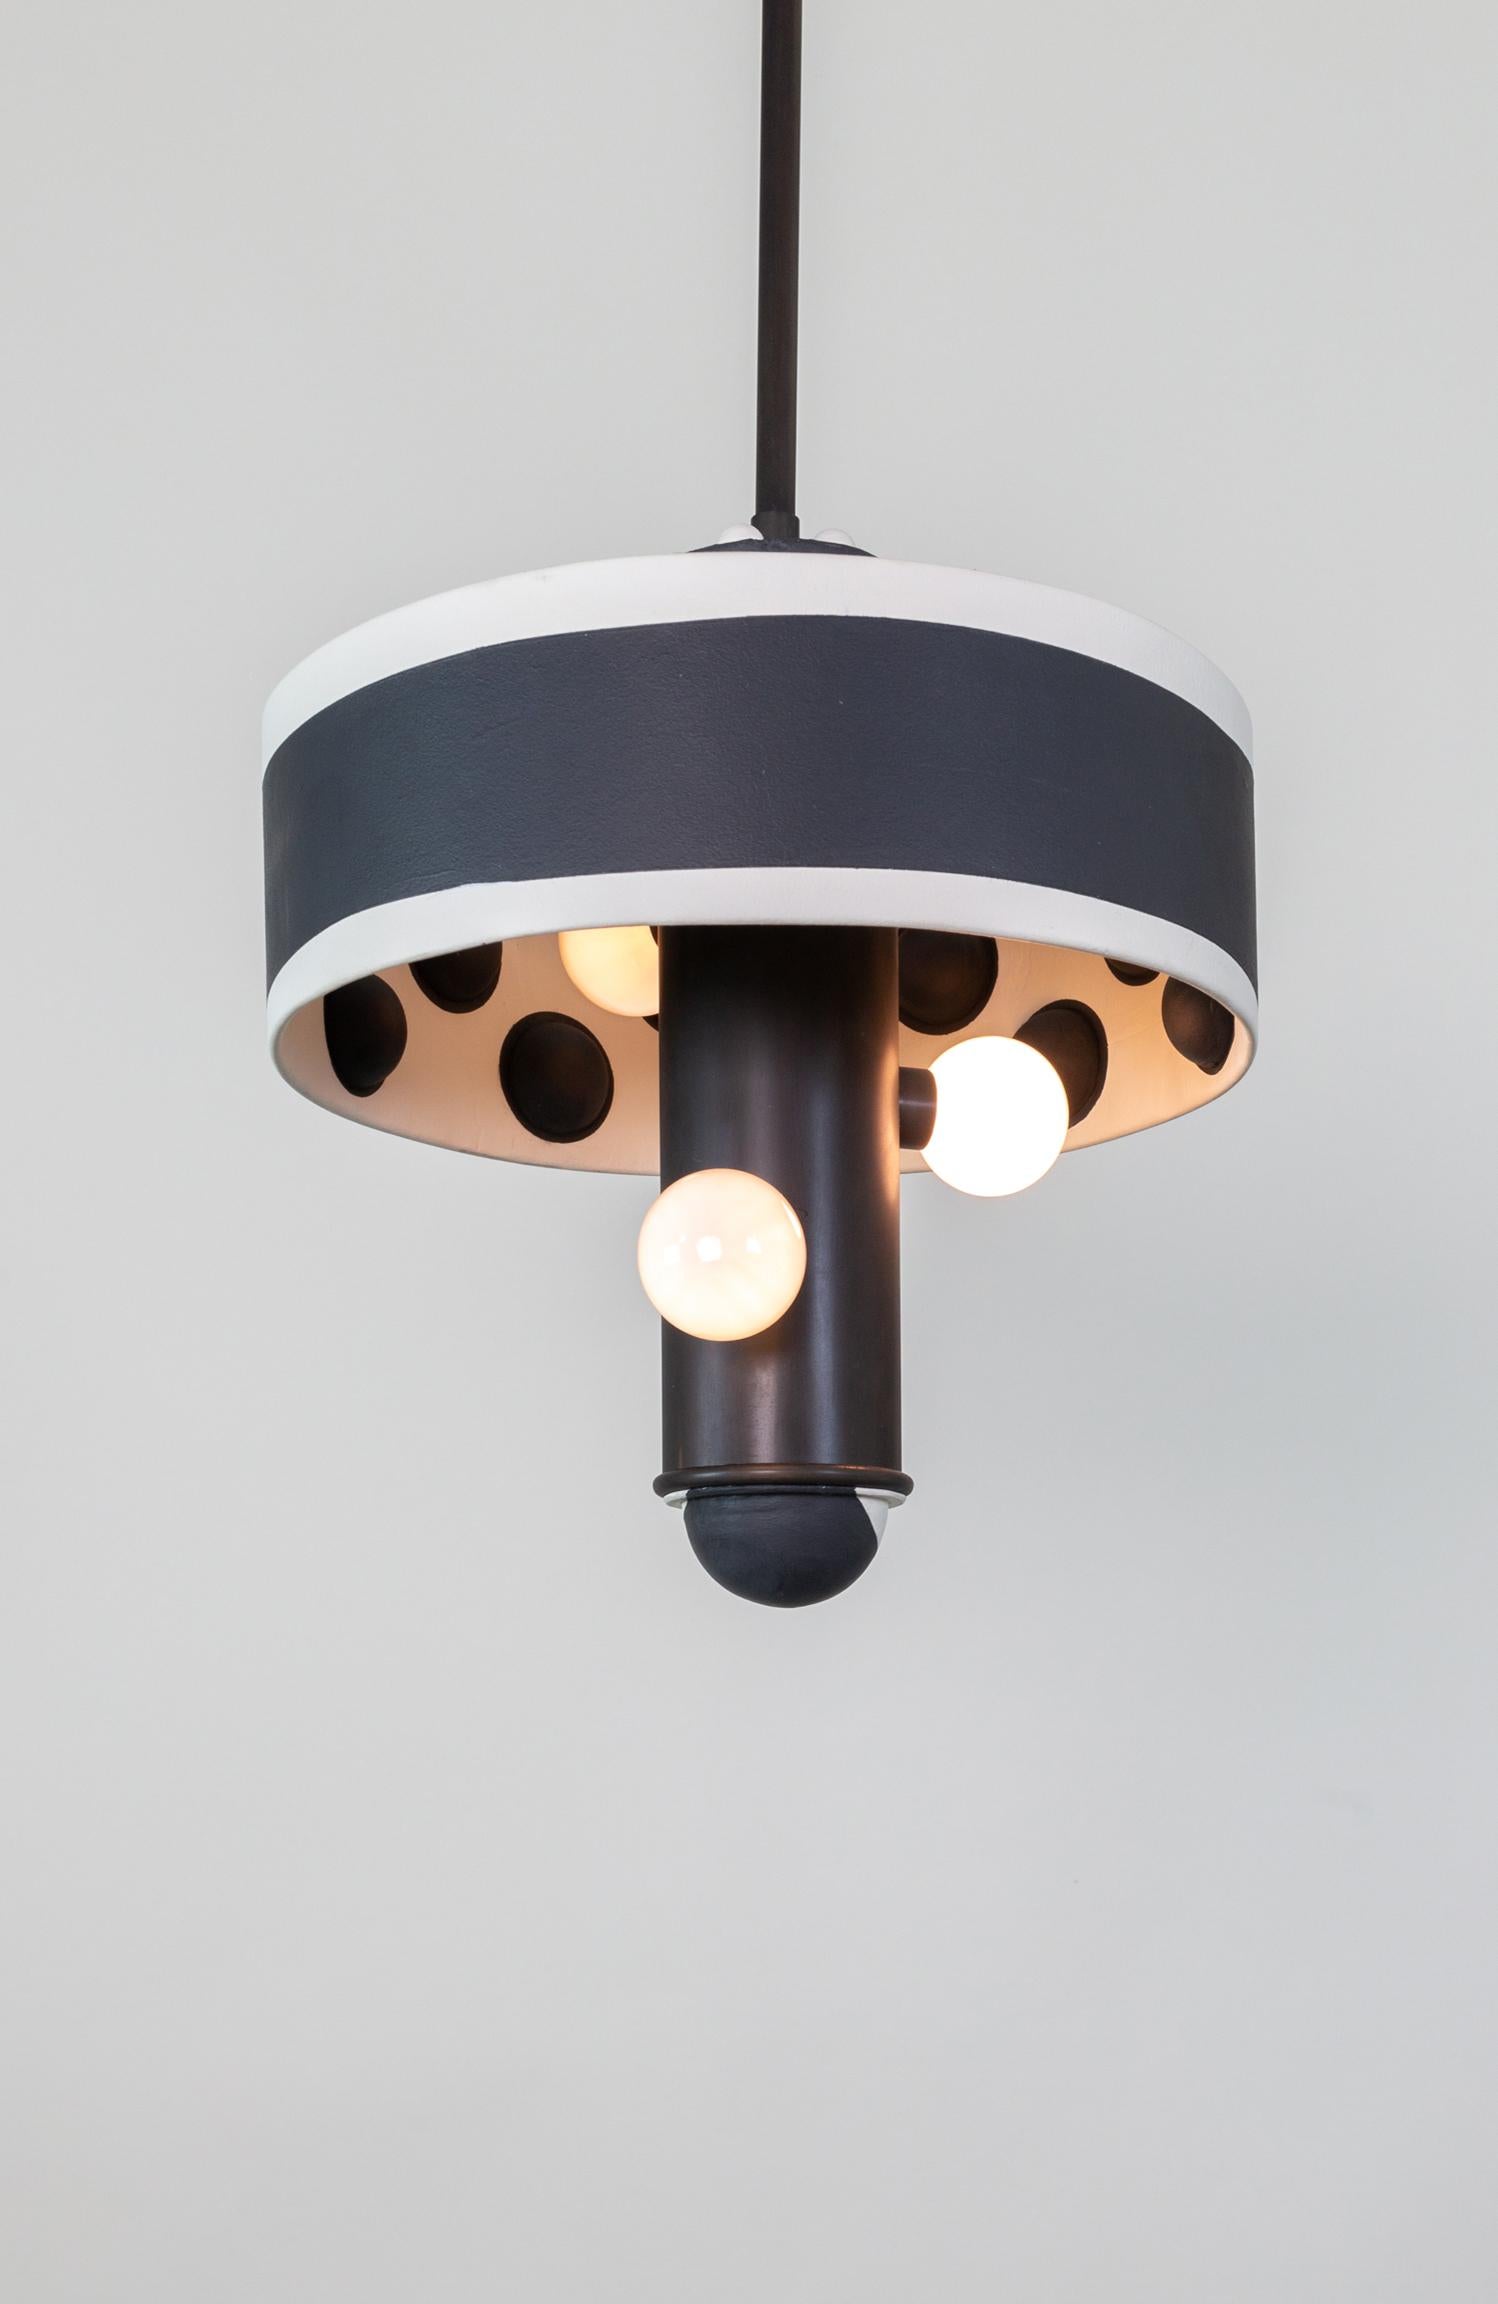 Matthew is a pendant light, part of the Posse collection, a system designed around the core ideas of collaboration and play.



The pendant is created to give the customer freedom in tailoring their own expression. The design is centered around